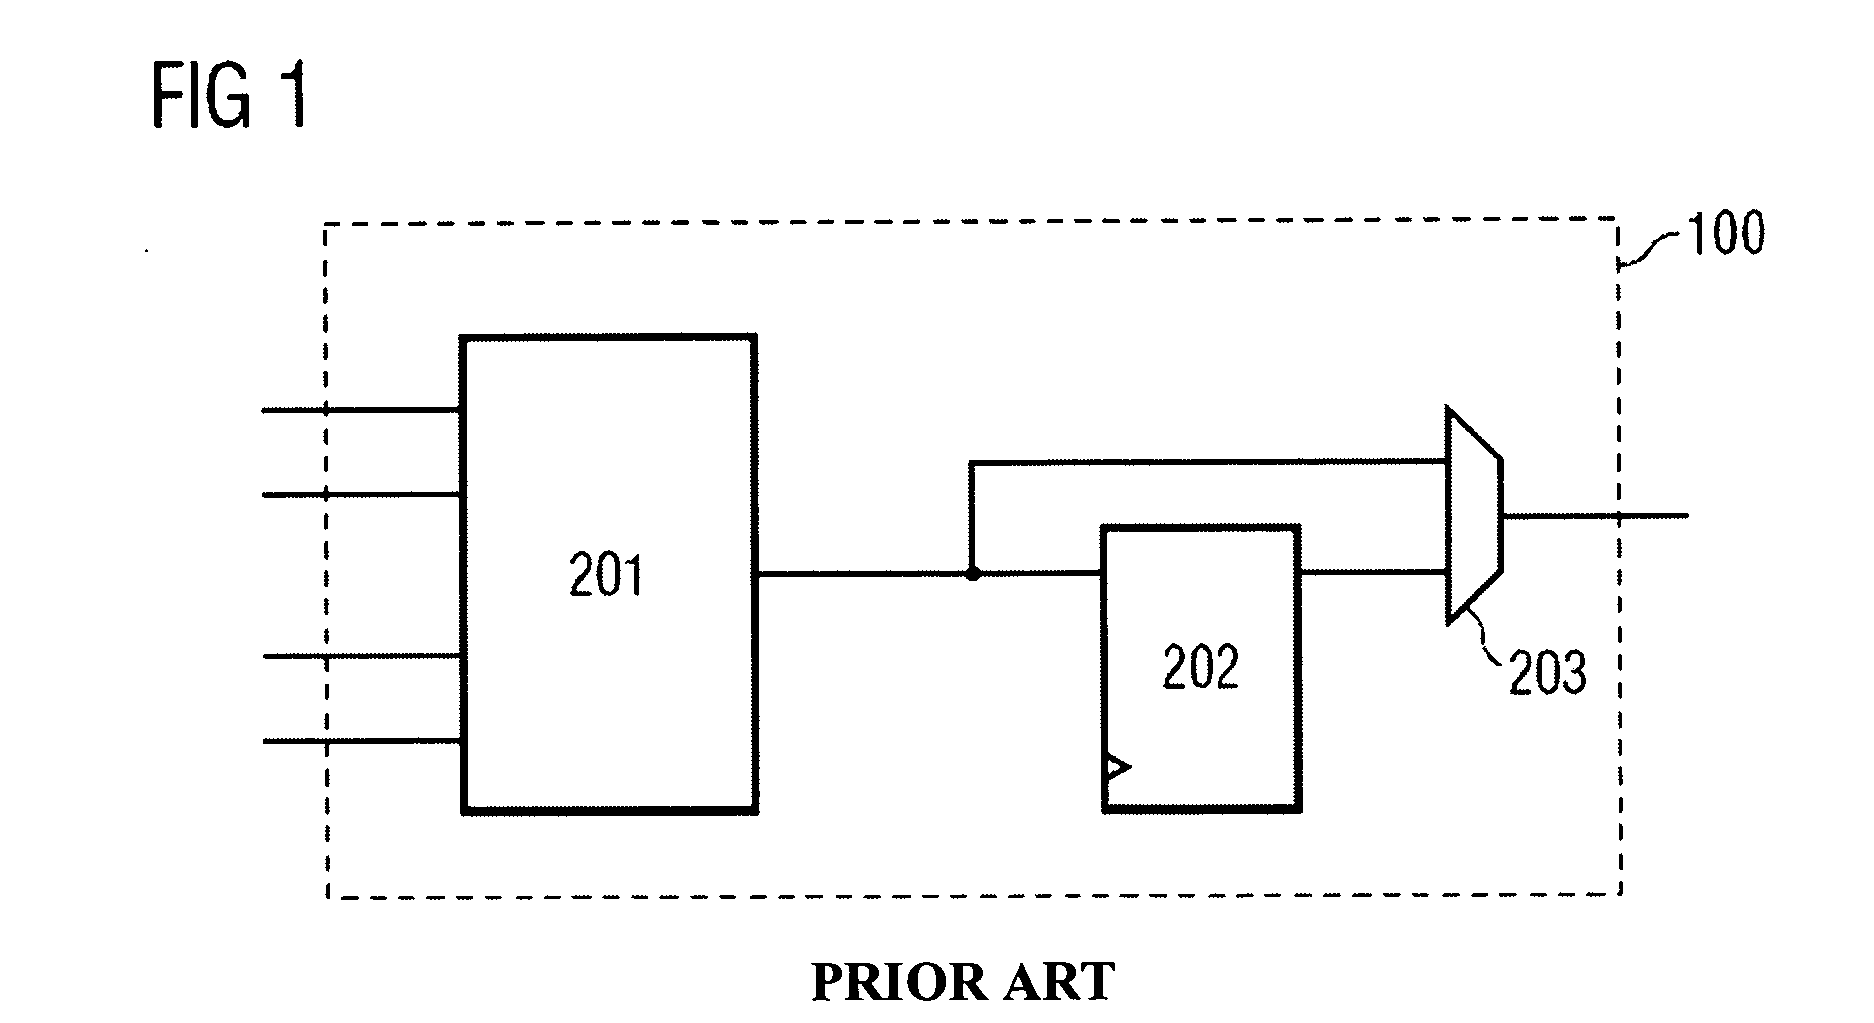 Programmable logic cell